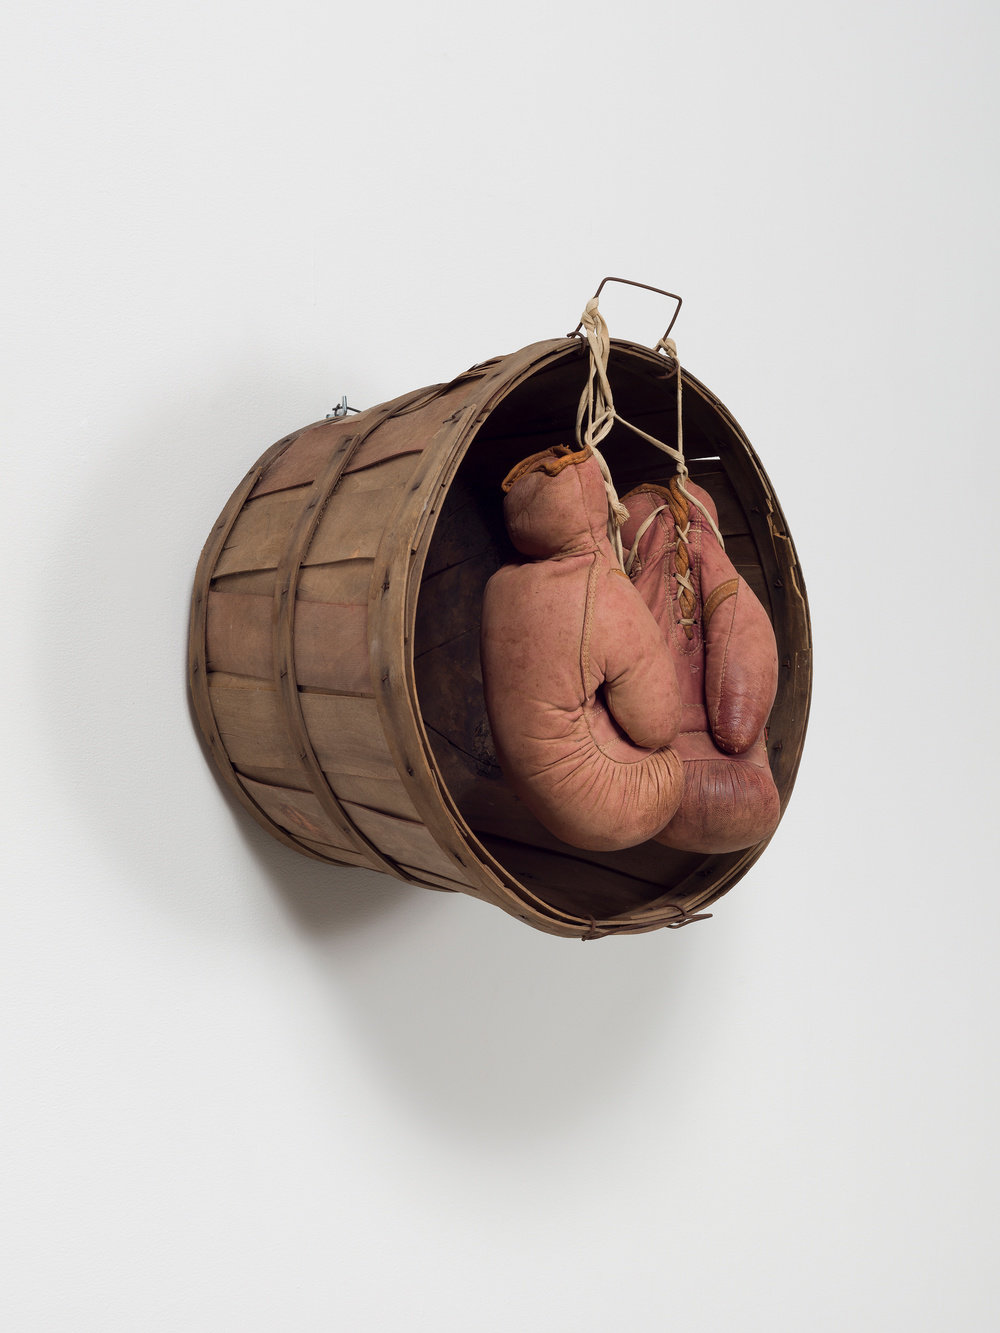 A sculpture by Lonnie Holley composed of worn boxing gloves hung from the handle of a wicker peach basket. The base of the basket is mounted to the wall.